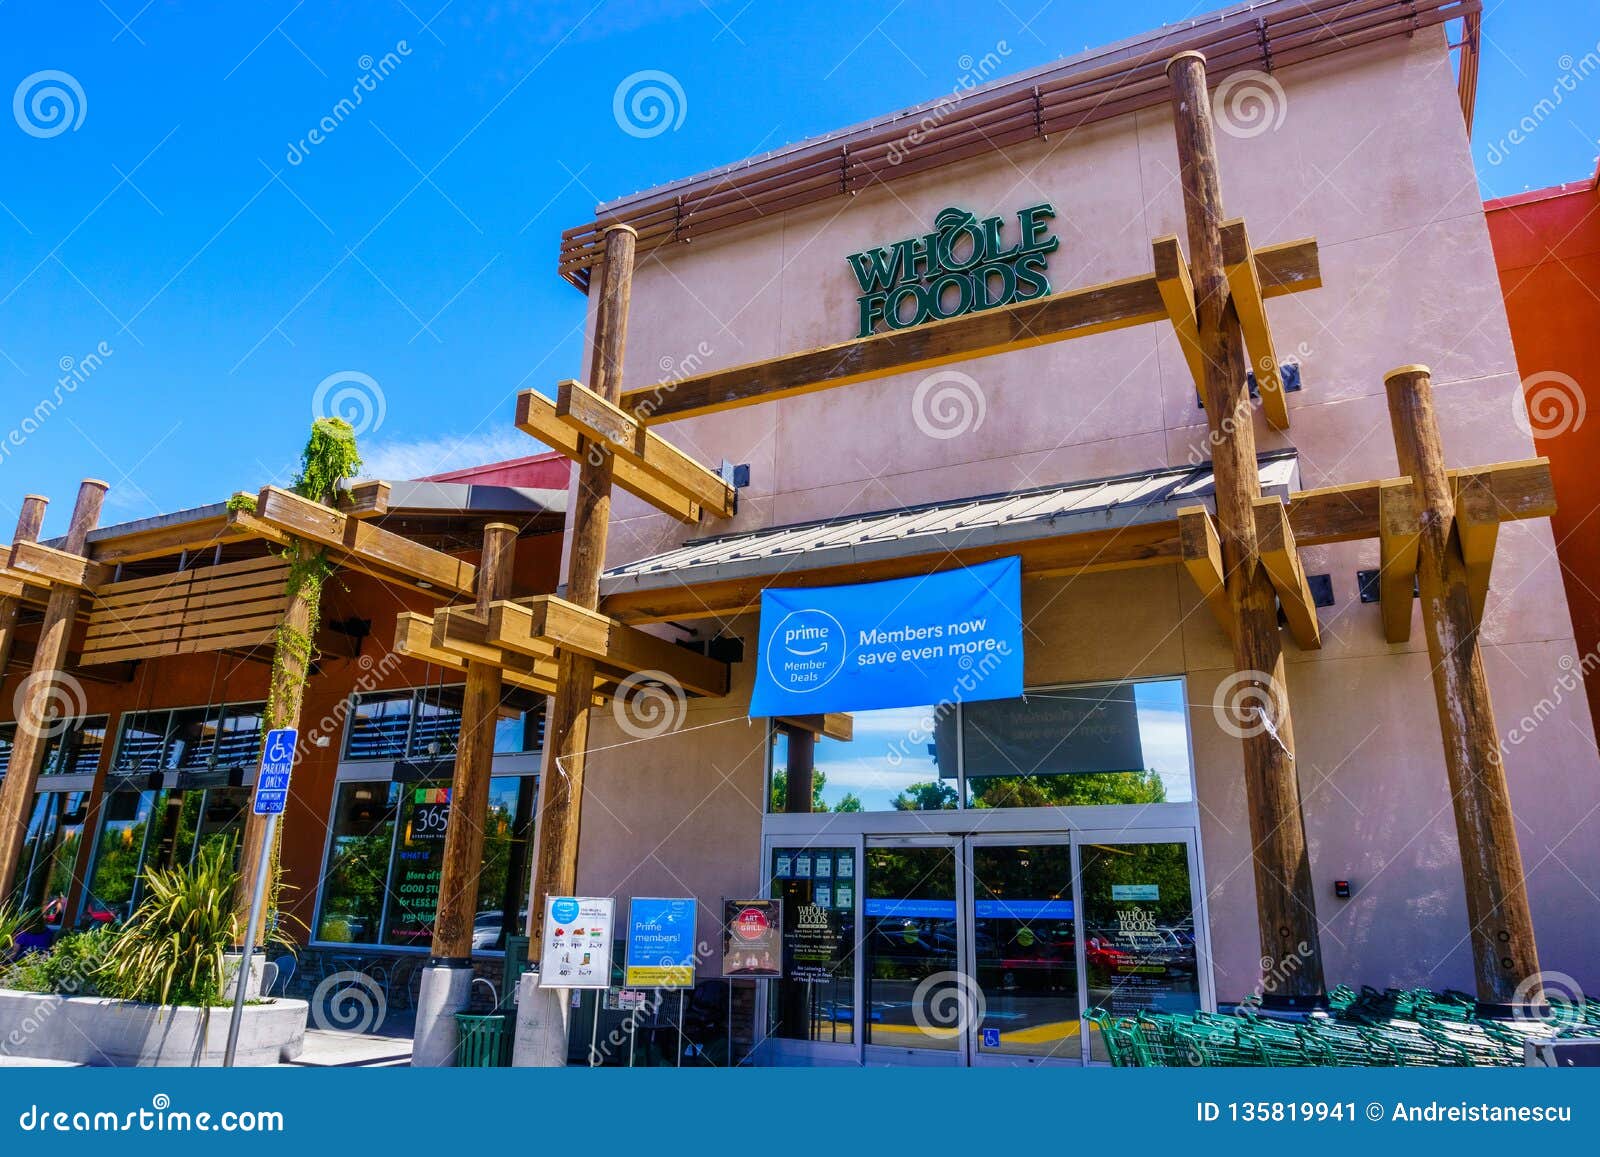 July 30 2018 Cupertino Ca Usa Whole Foods Store Displaying An Ad